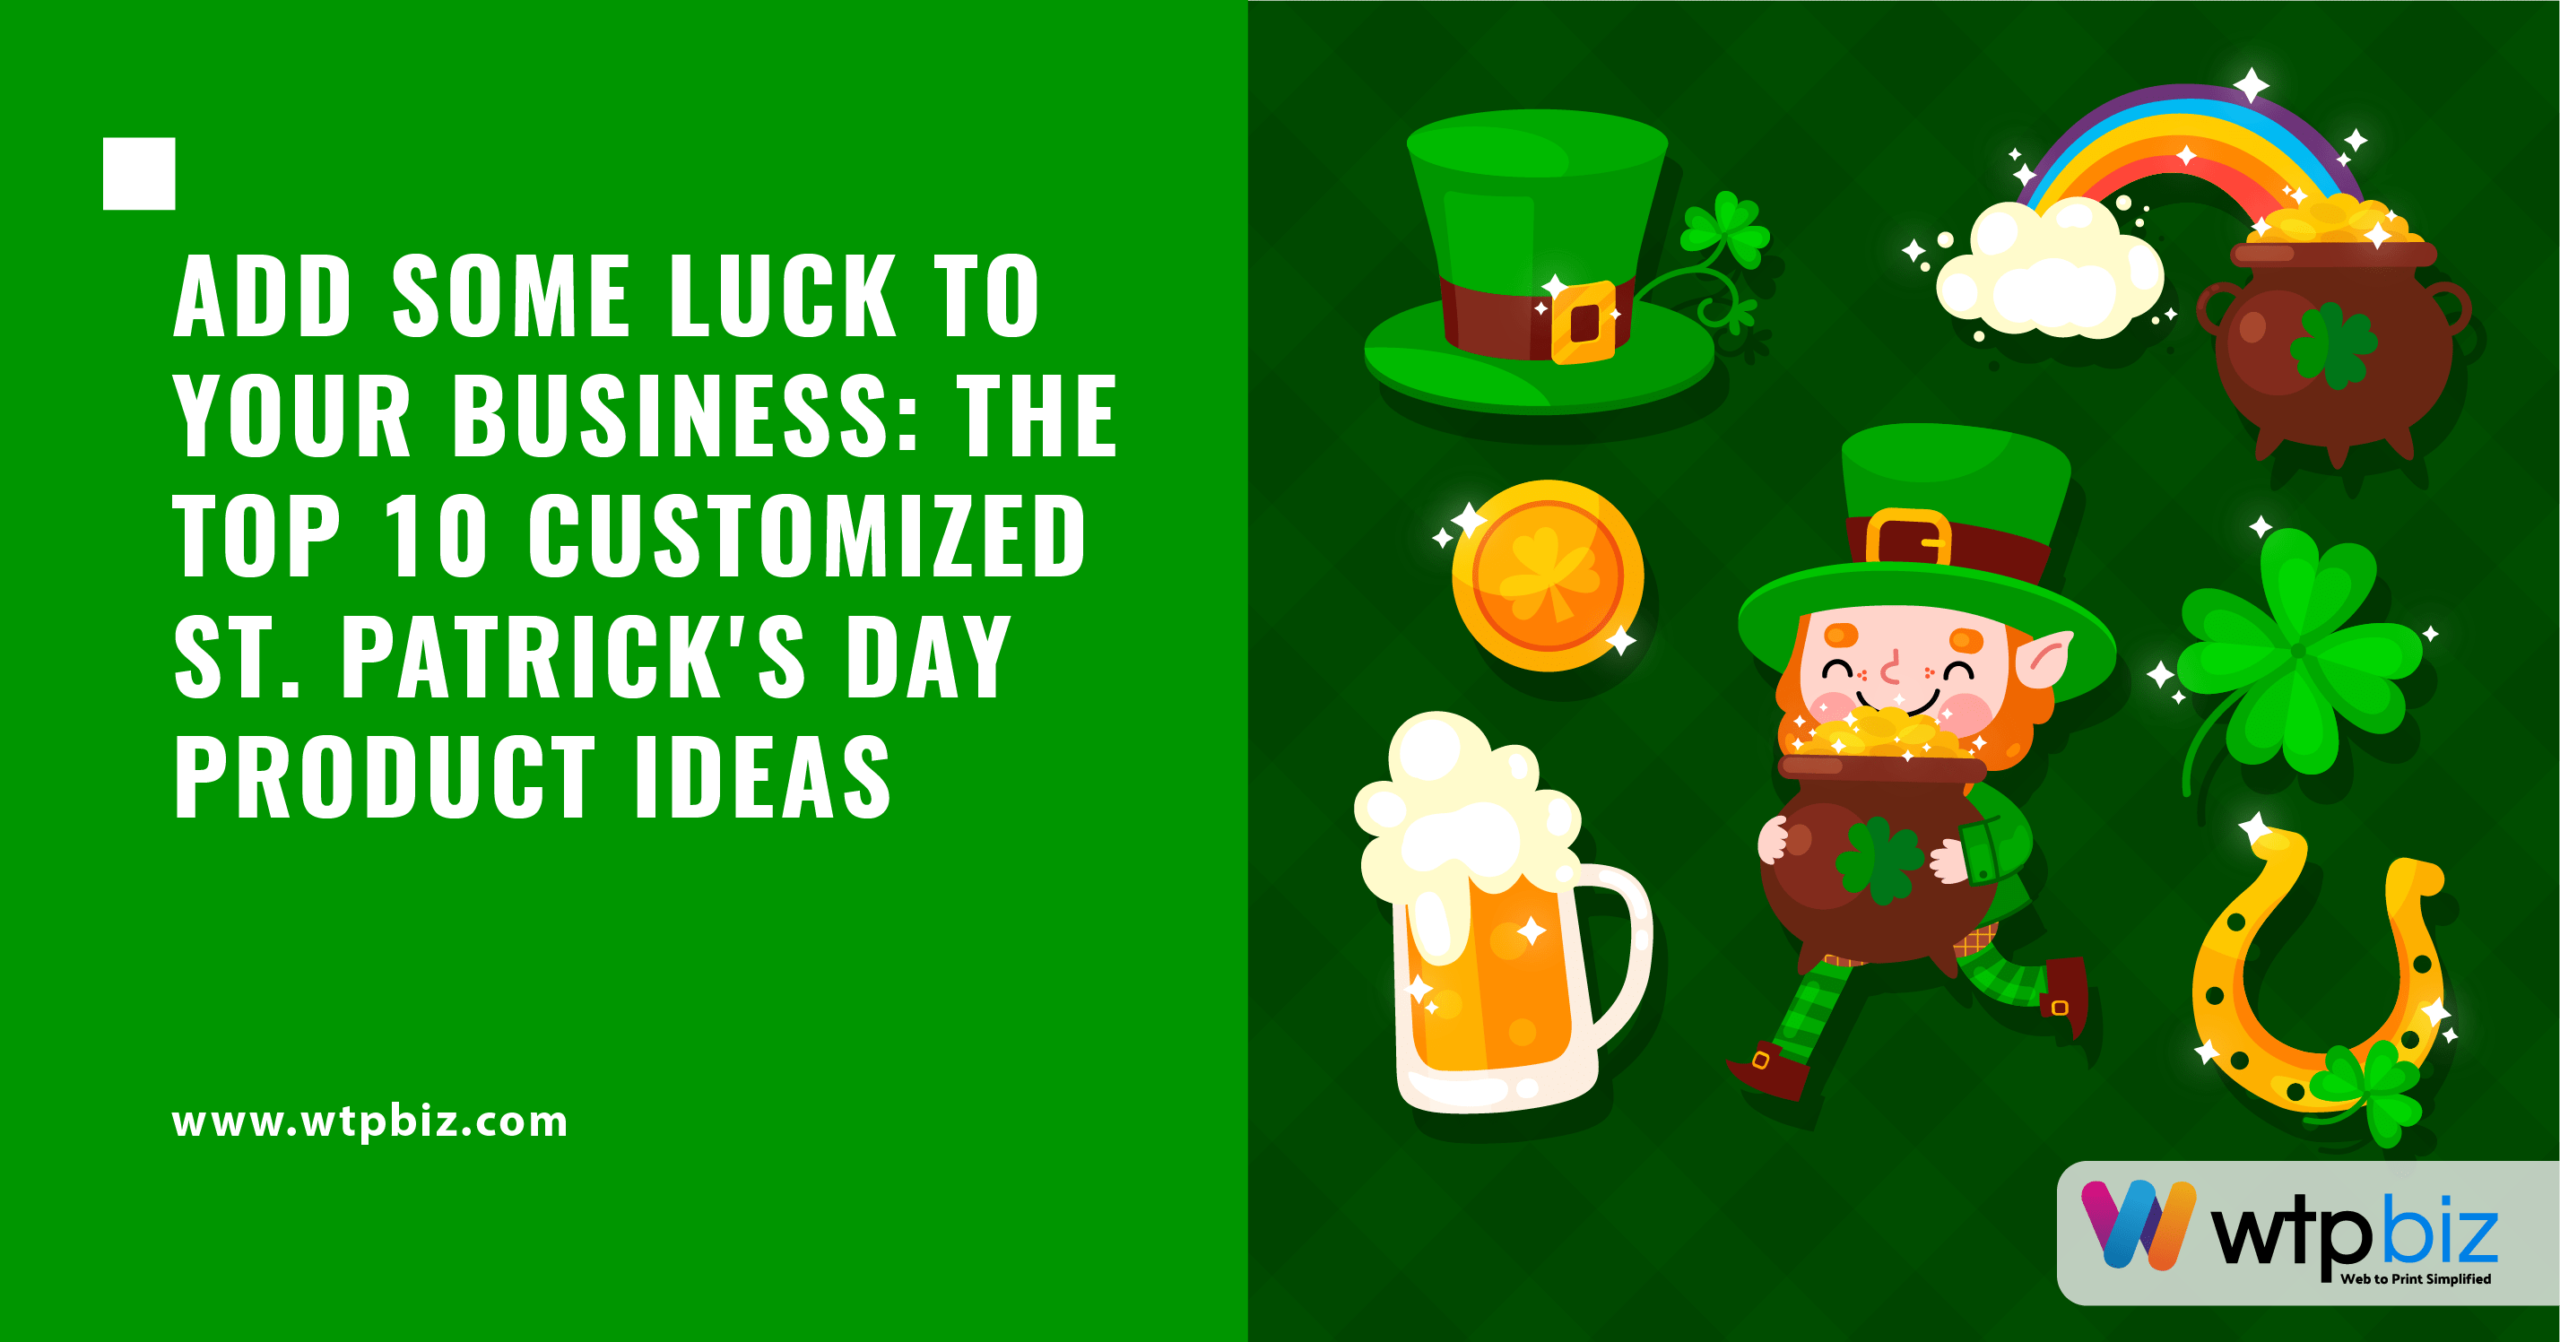 10 Customized St. Patrick's Day Product Ideas